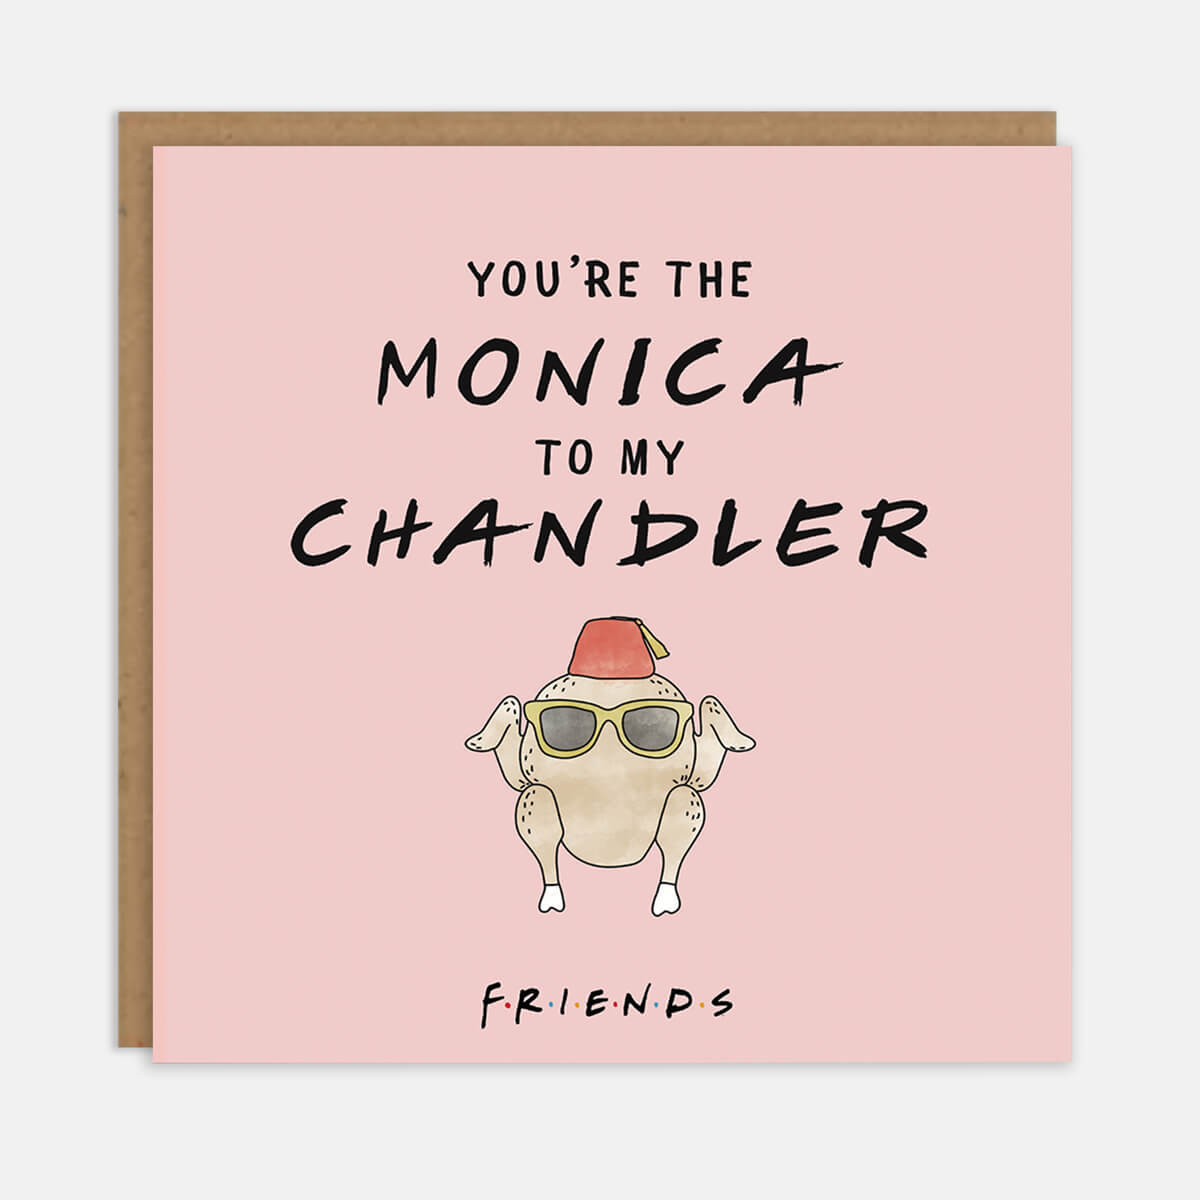 Friends TV Show Anniversary or Valentine's Day Card which read "You're The Monica To My Chandler" - Pastel Pink with black foiled text